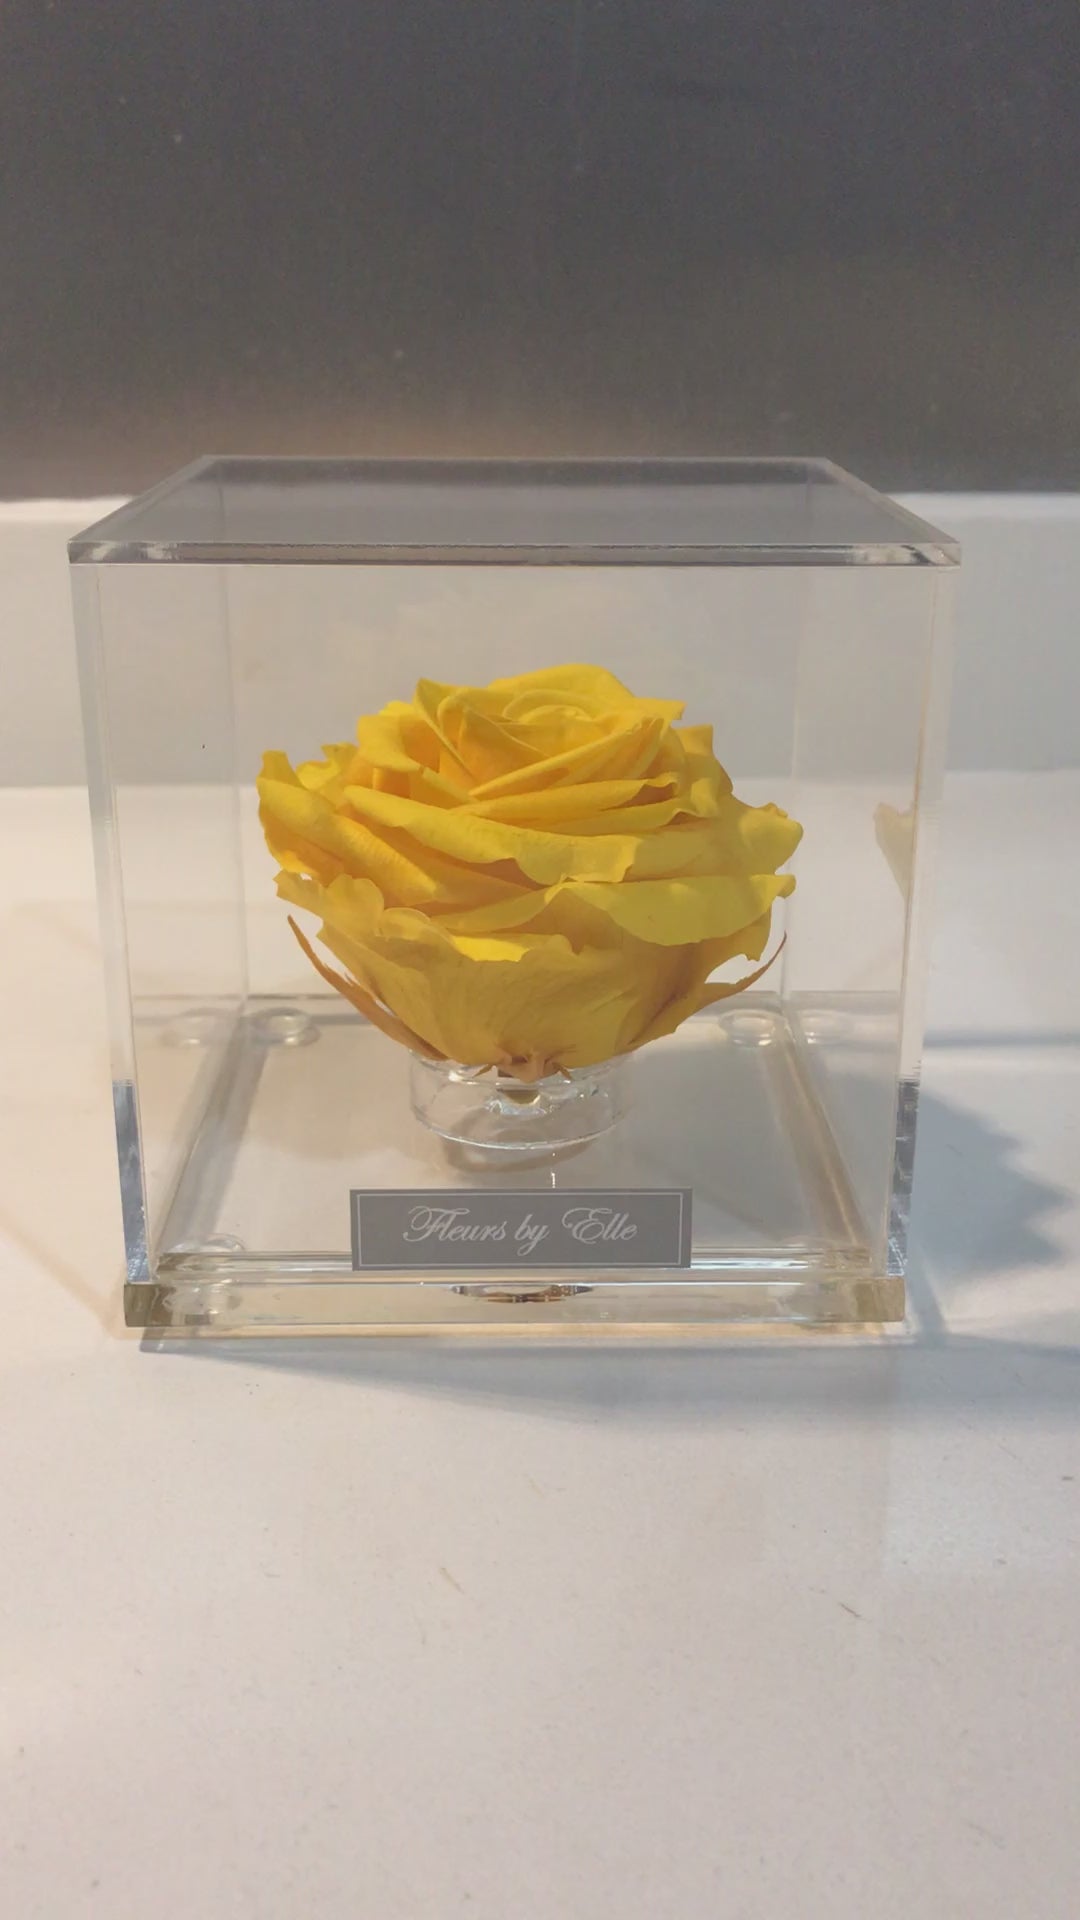 The Rose Cube - Color: Yellow